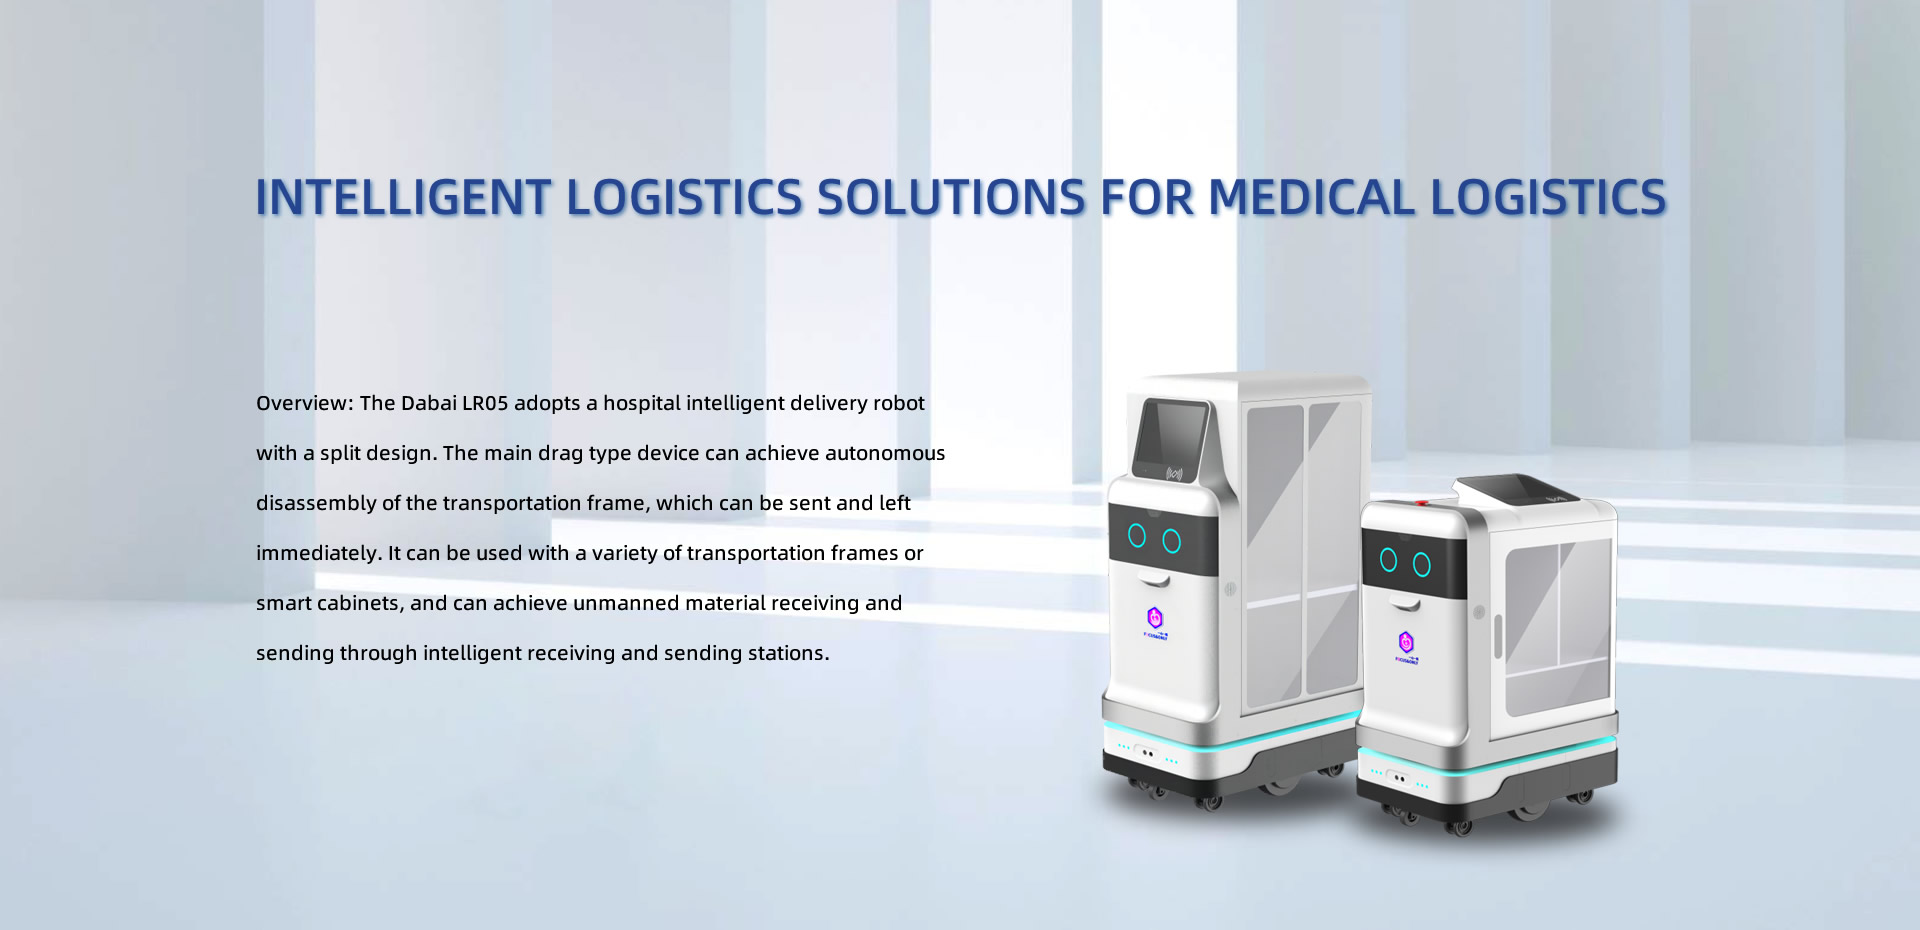 Intelligent logistics solutions for medical logistics. Overview: The Dabai LR05 adopts a hospital intelligent delivery robot with a split design. The main drag type device can achieve autonomous disassembly of the transportation frame, which can be sent and left immediately. It can be used with a variety of transportation frames or smart cabinets, and can achieve unmanned material receiving and sending through intelligent receiving and sending stations.